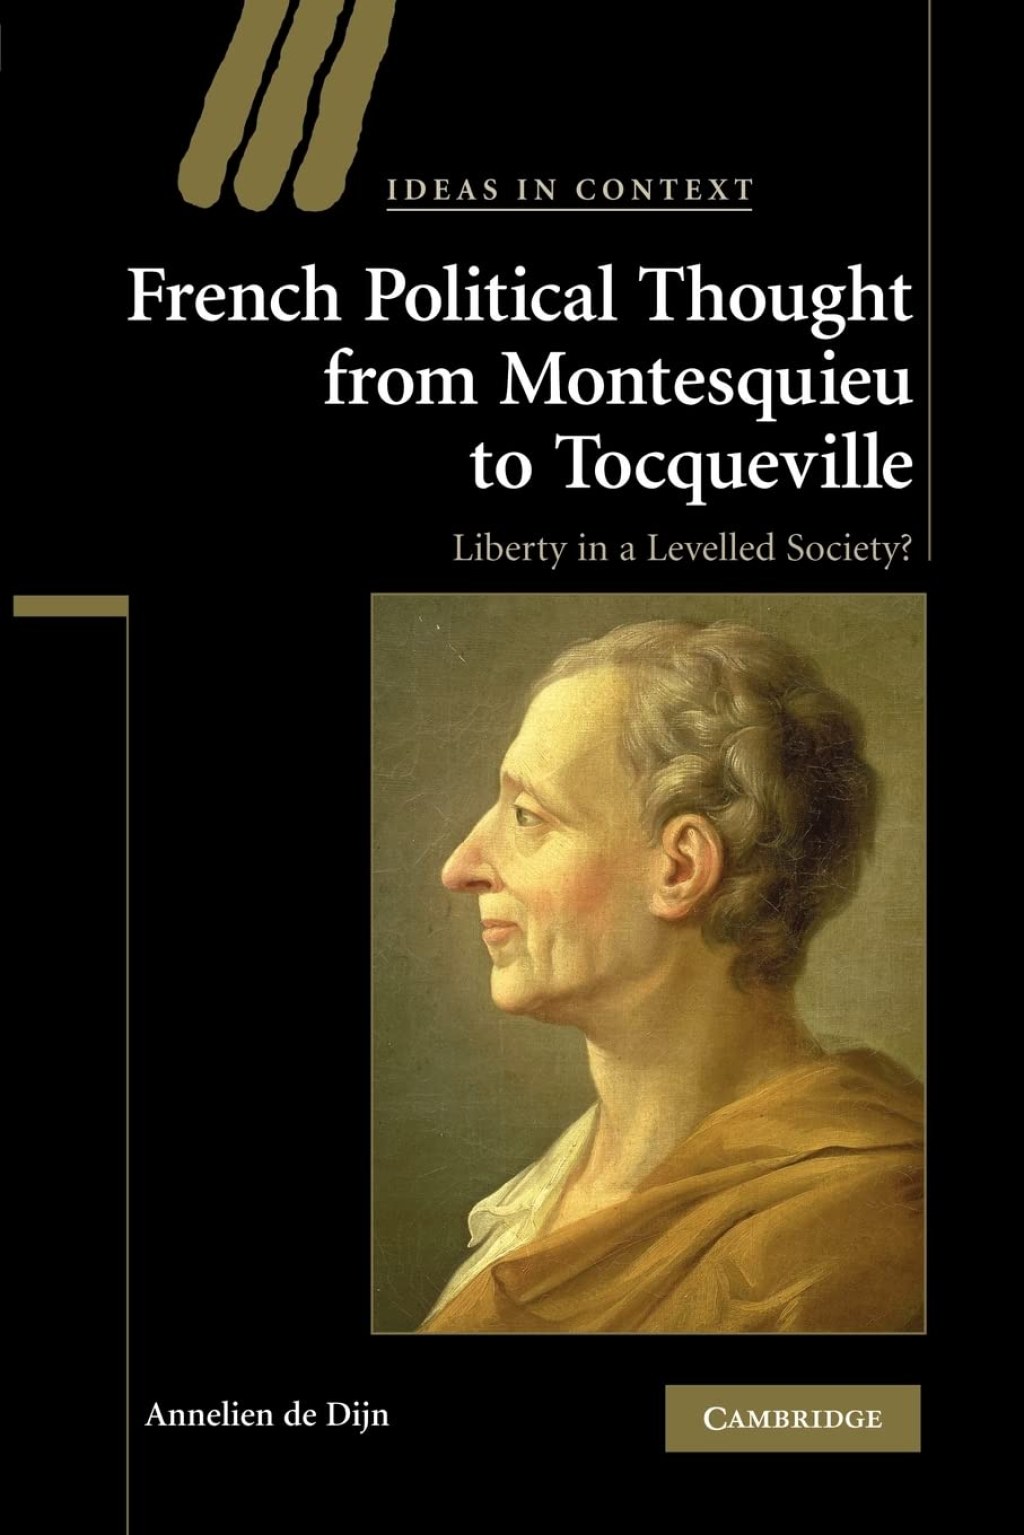 french political thought - Amazon